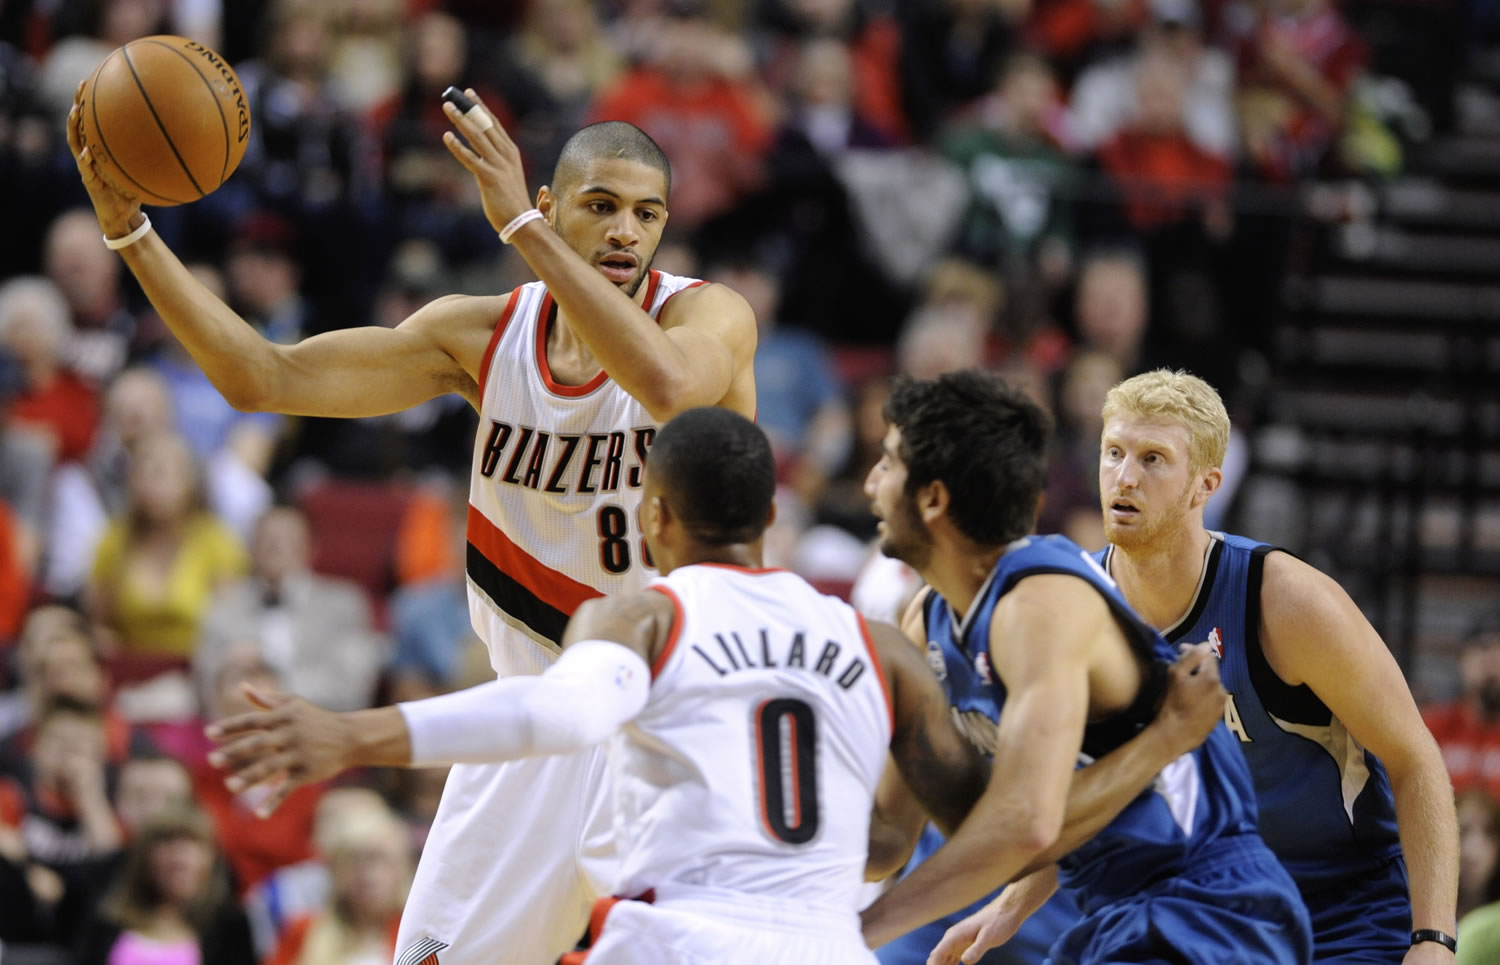 Portland Trail Blazers' Nicolas Batum is among current NBA players who previously played in the Nike Hoop Summit.